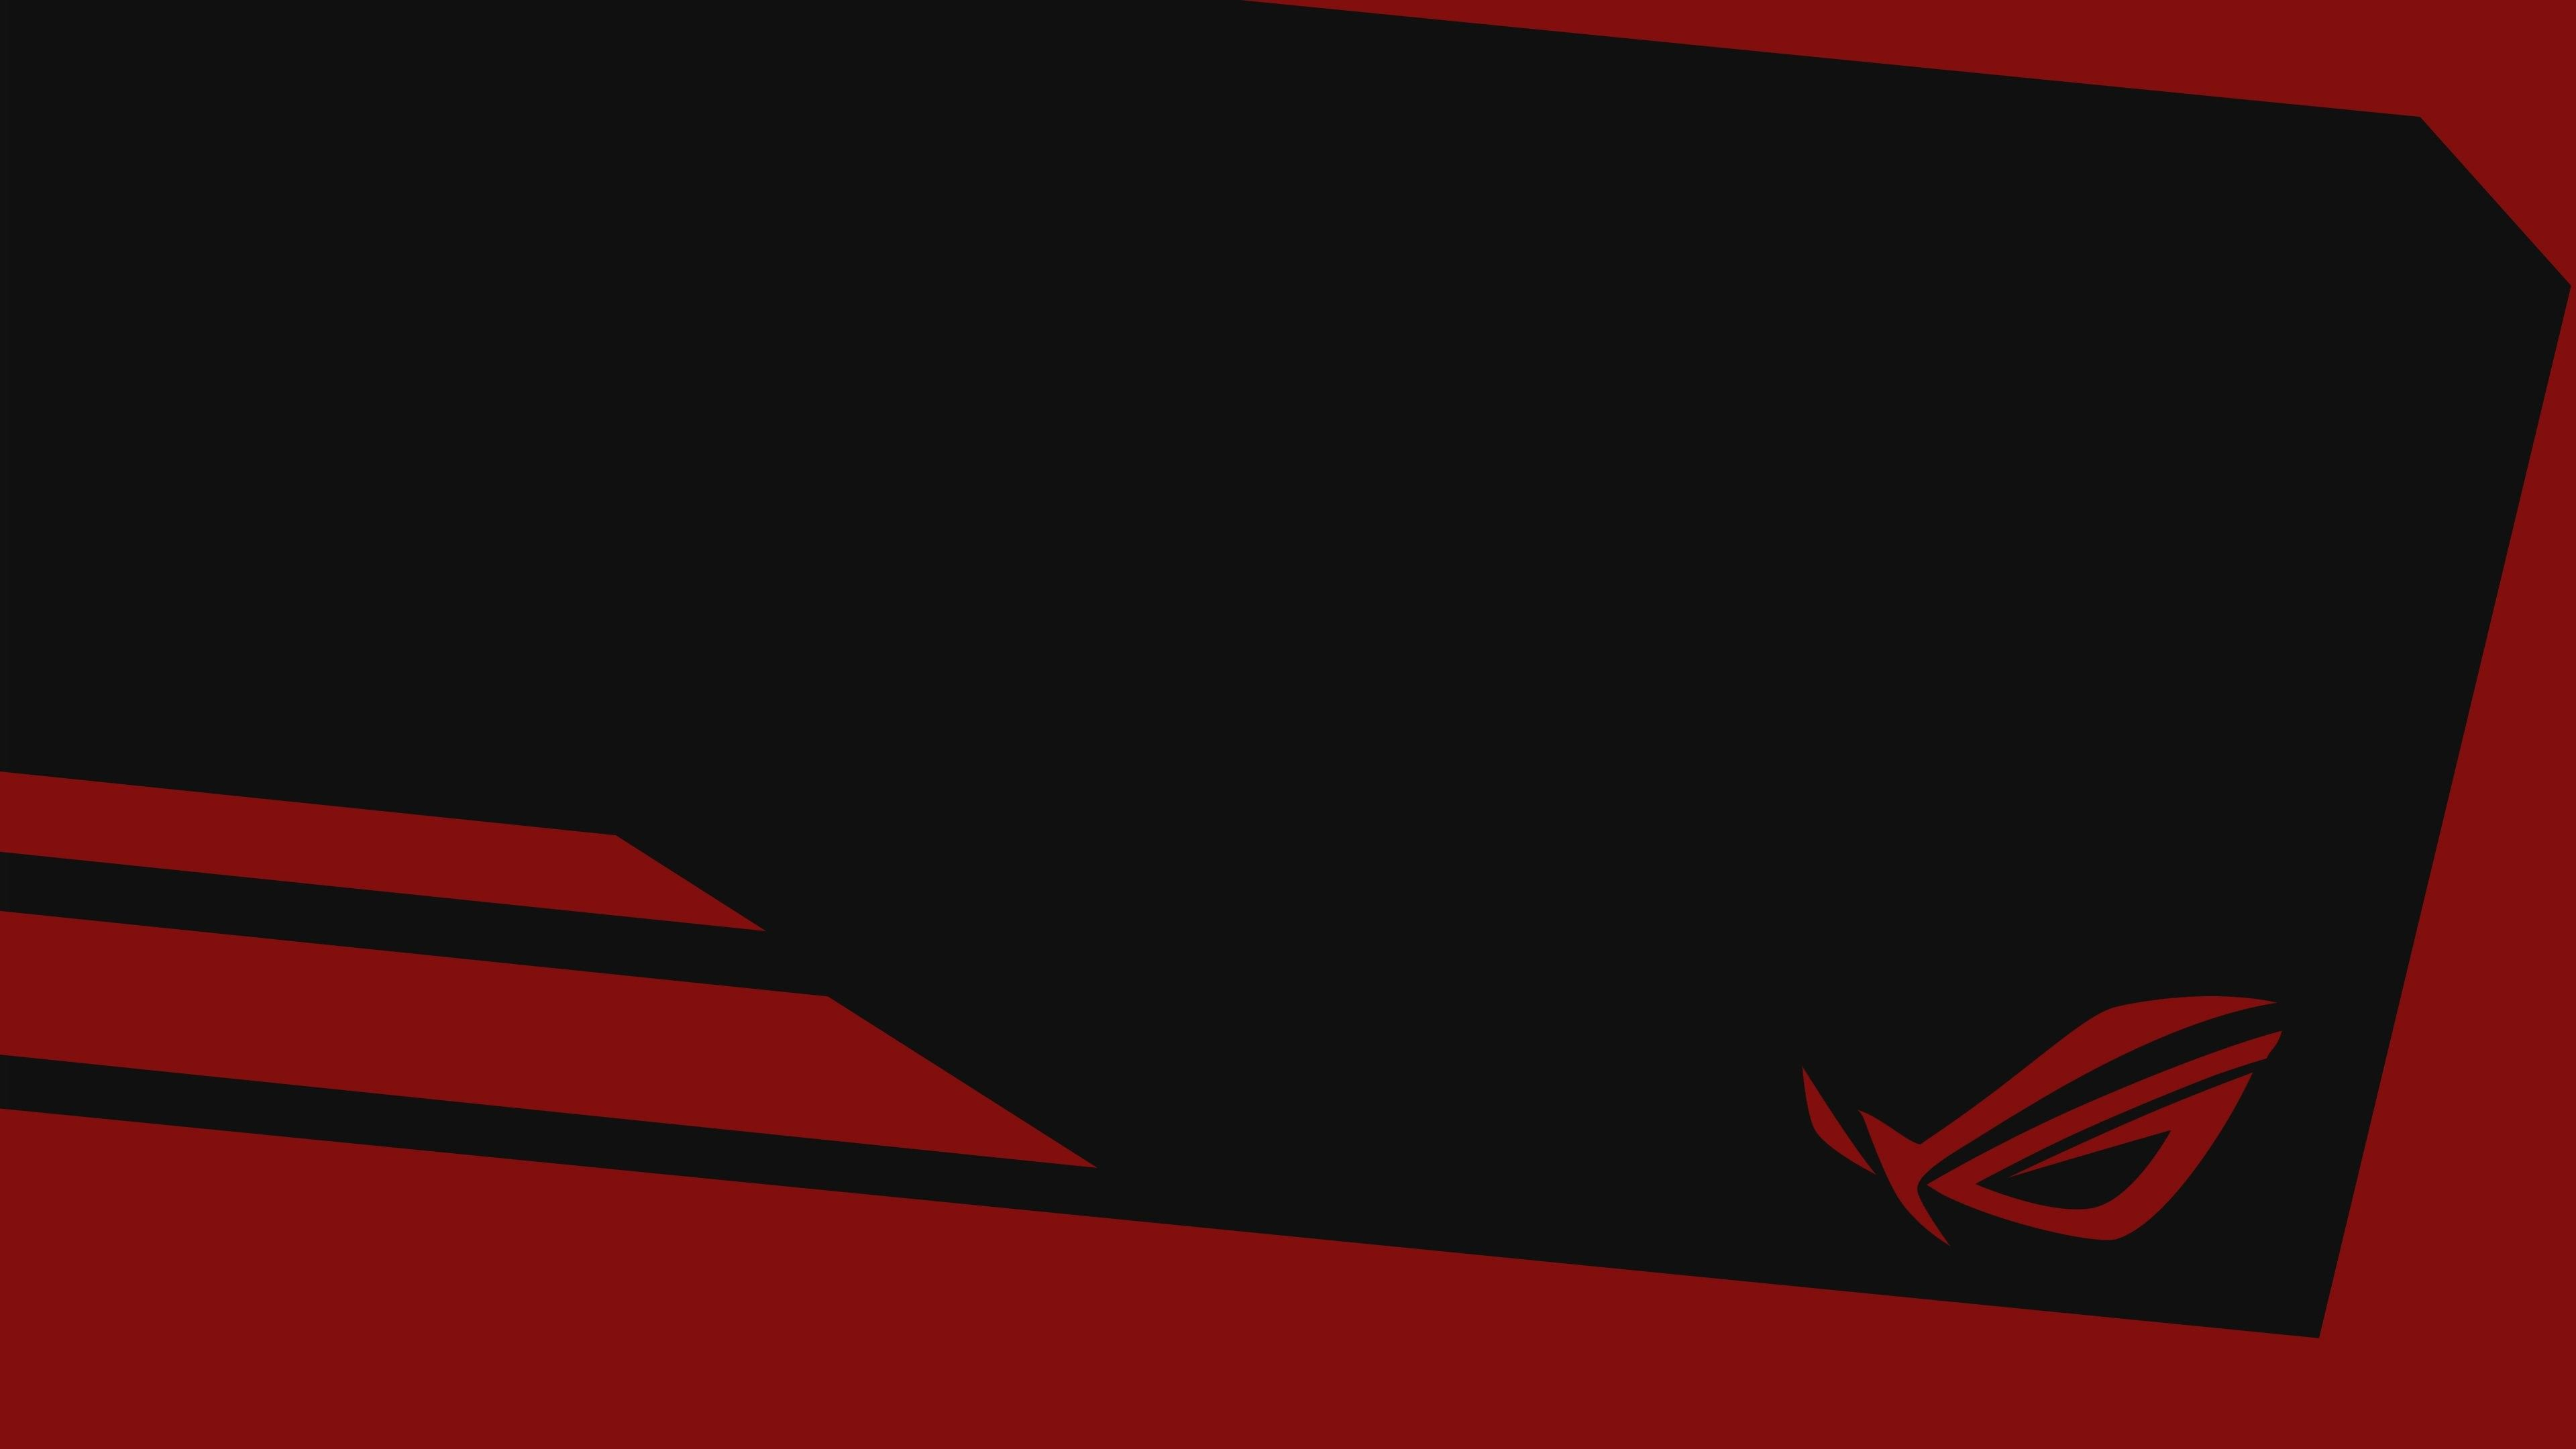 3840x2160 Red ROG Wallpapers Top Free Red ROG Backgrounds